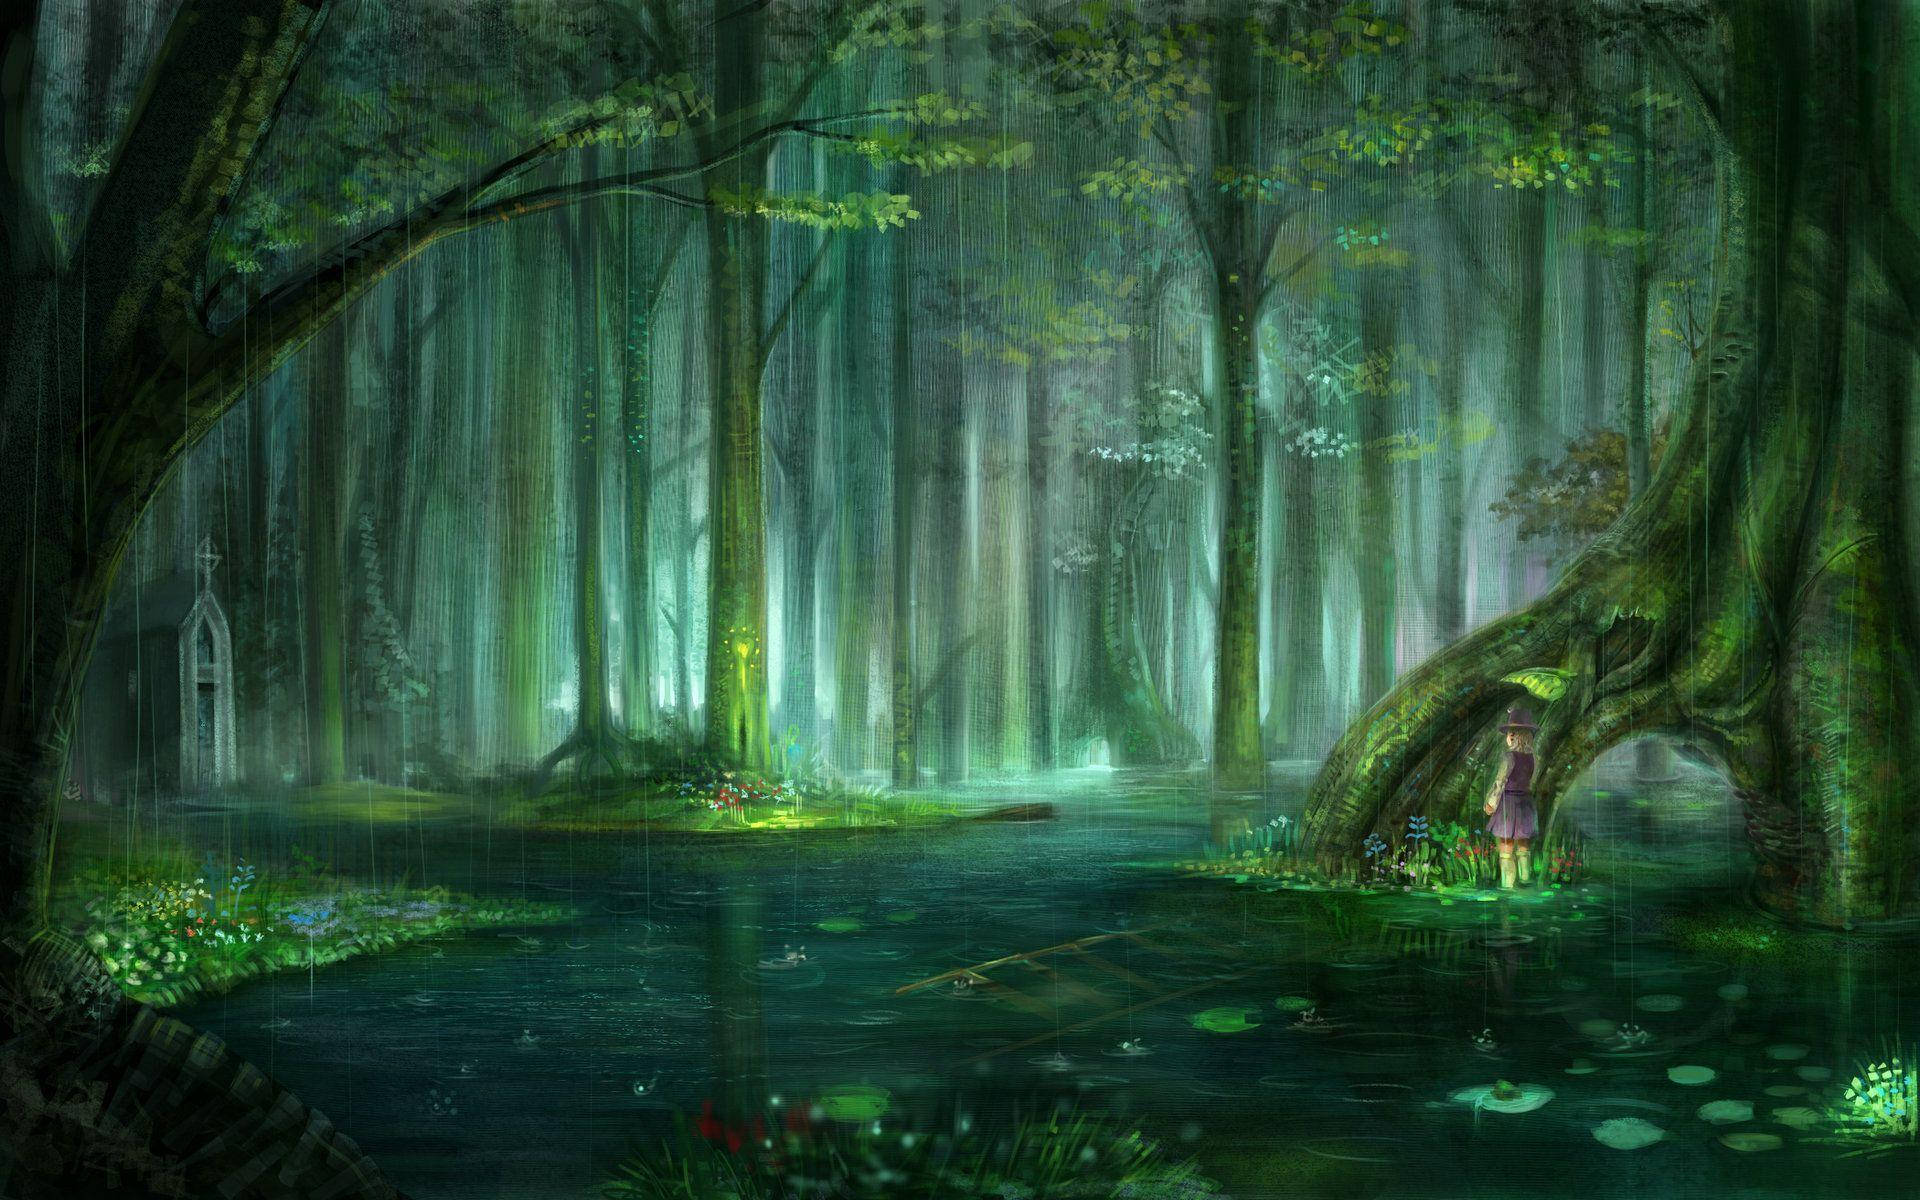 Rainy Day In An Enchanted Forest Picture